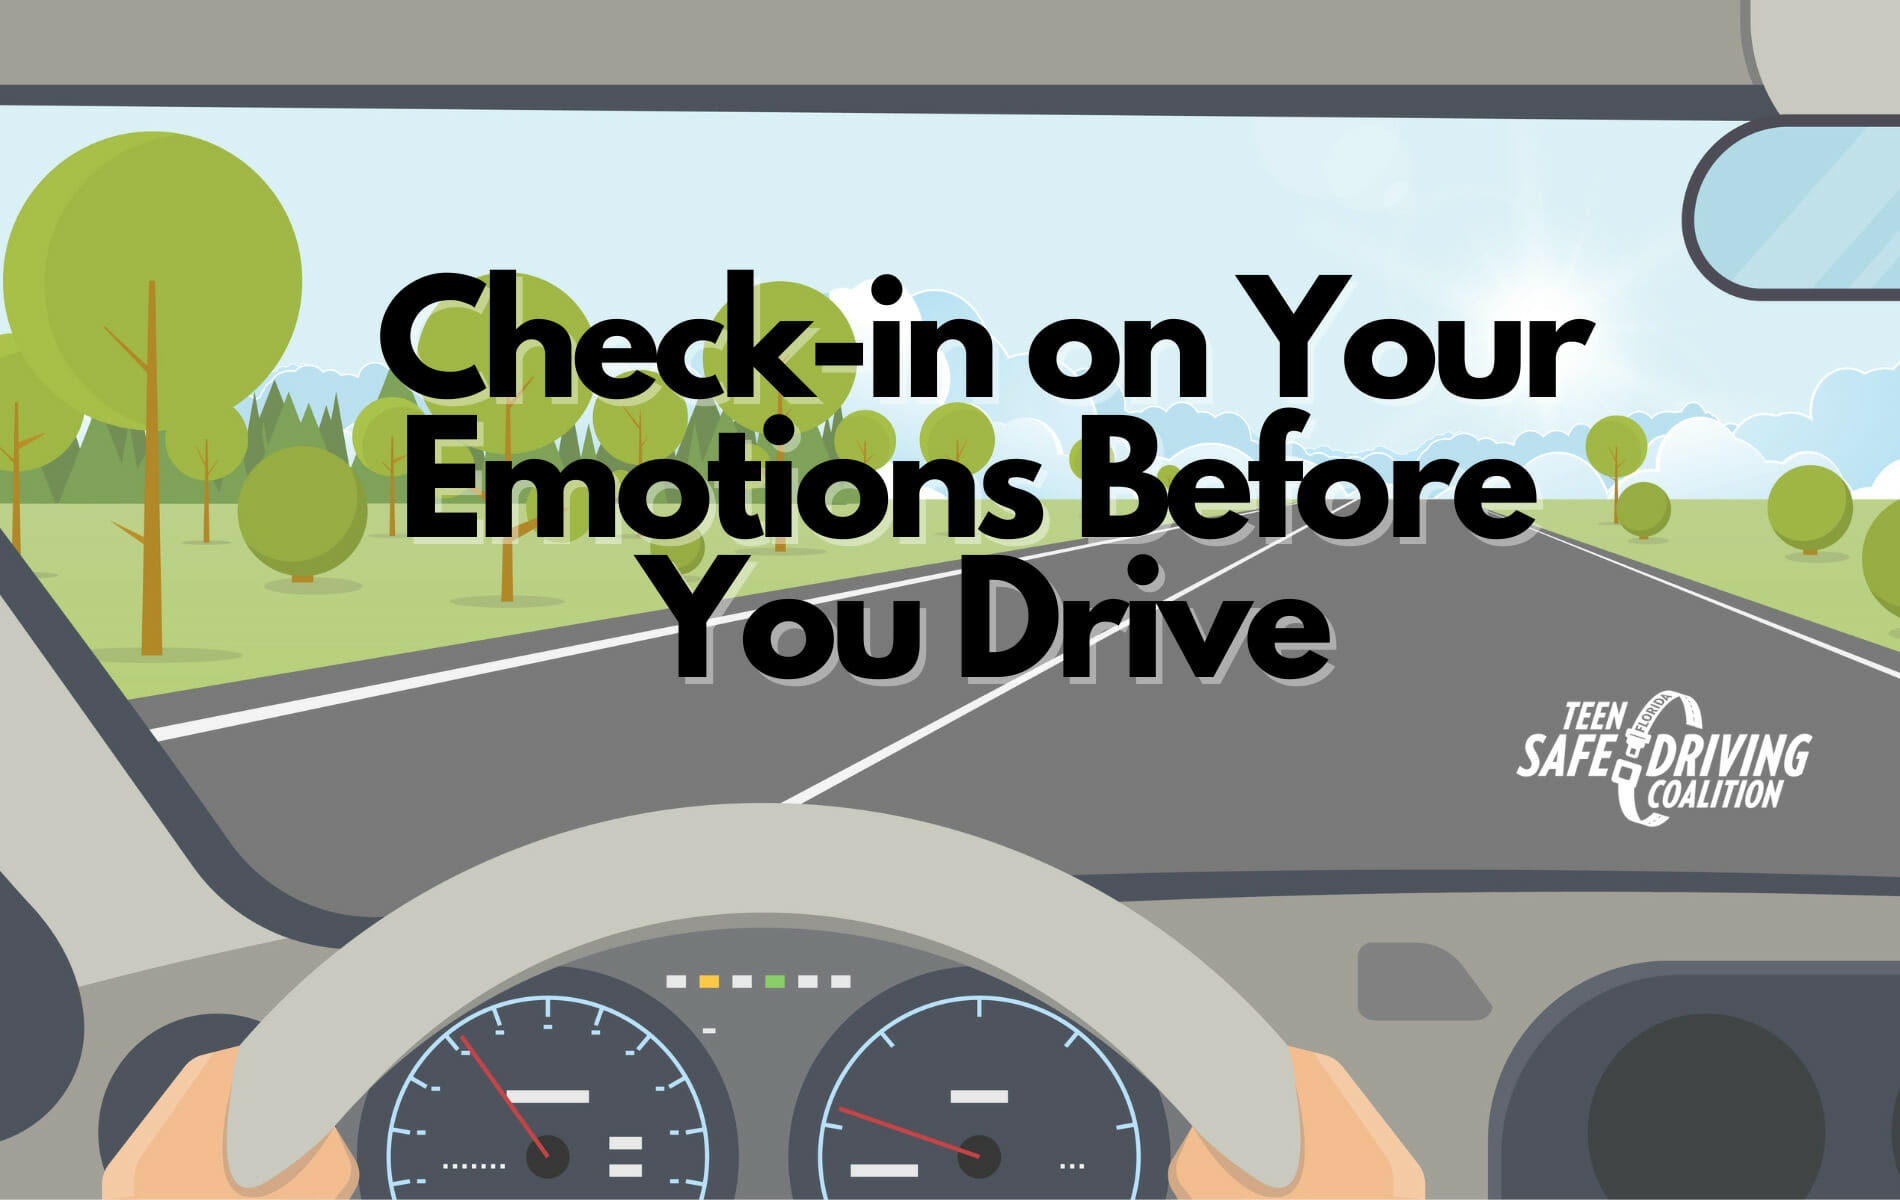 Check-in on Your Emotions Before You Drive